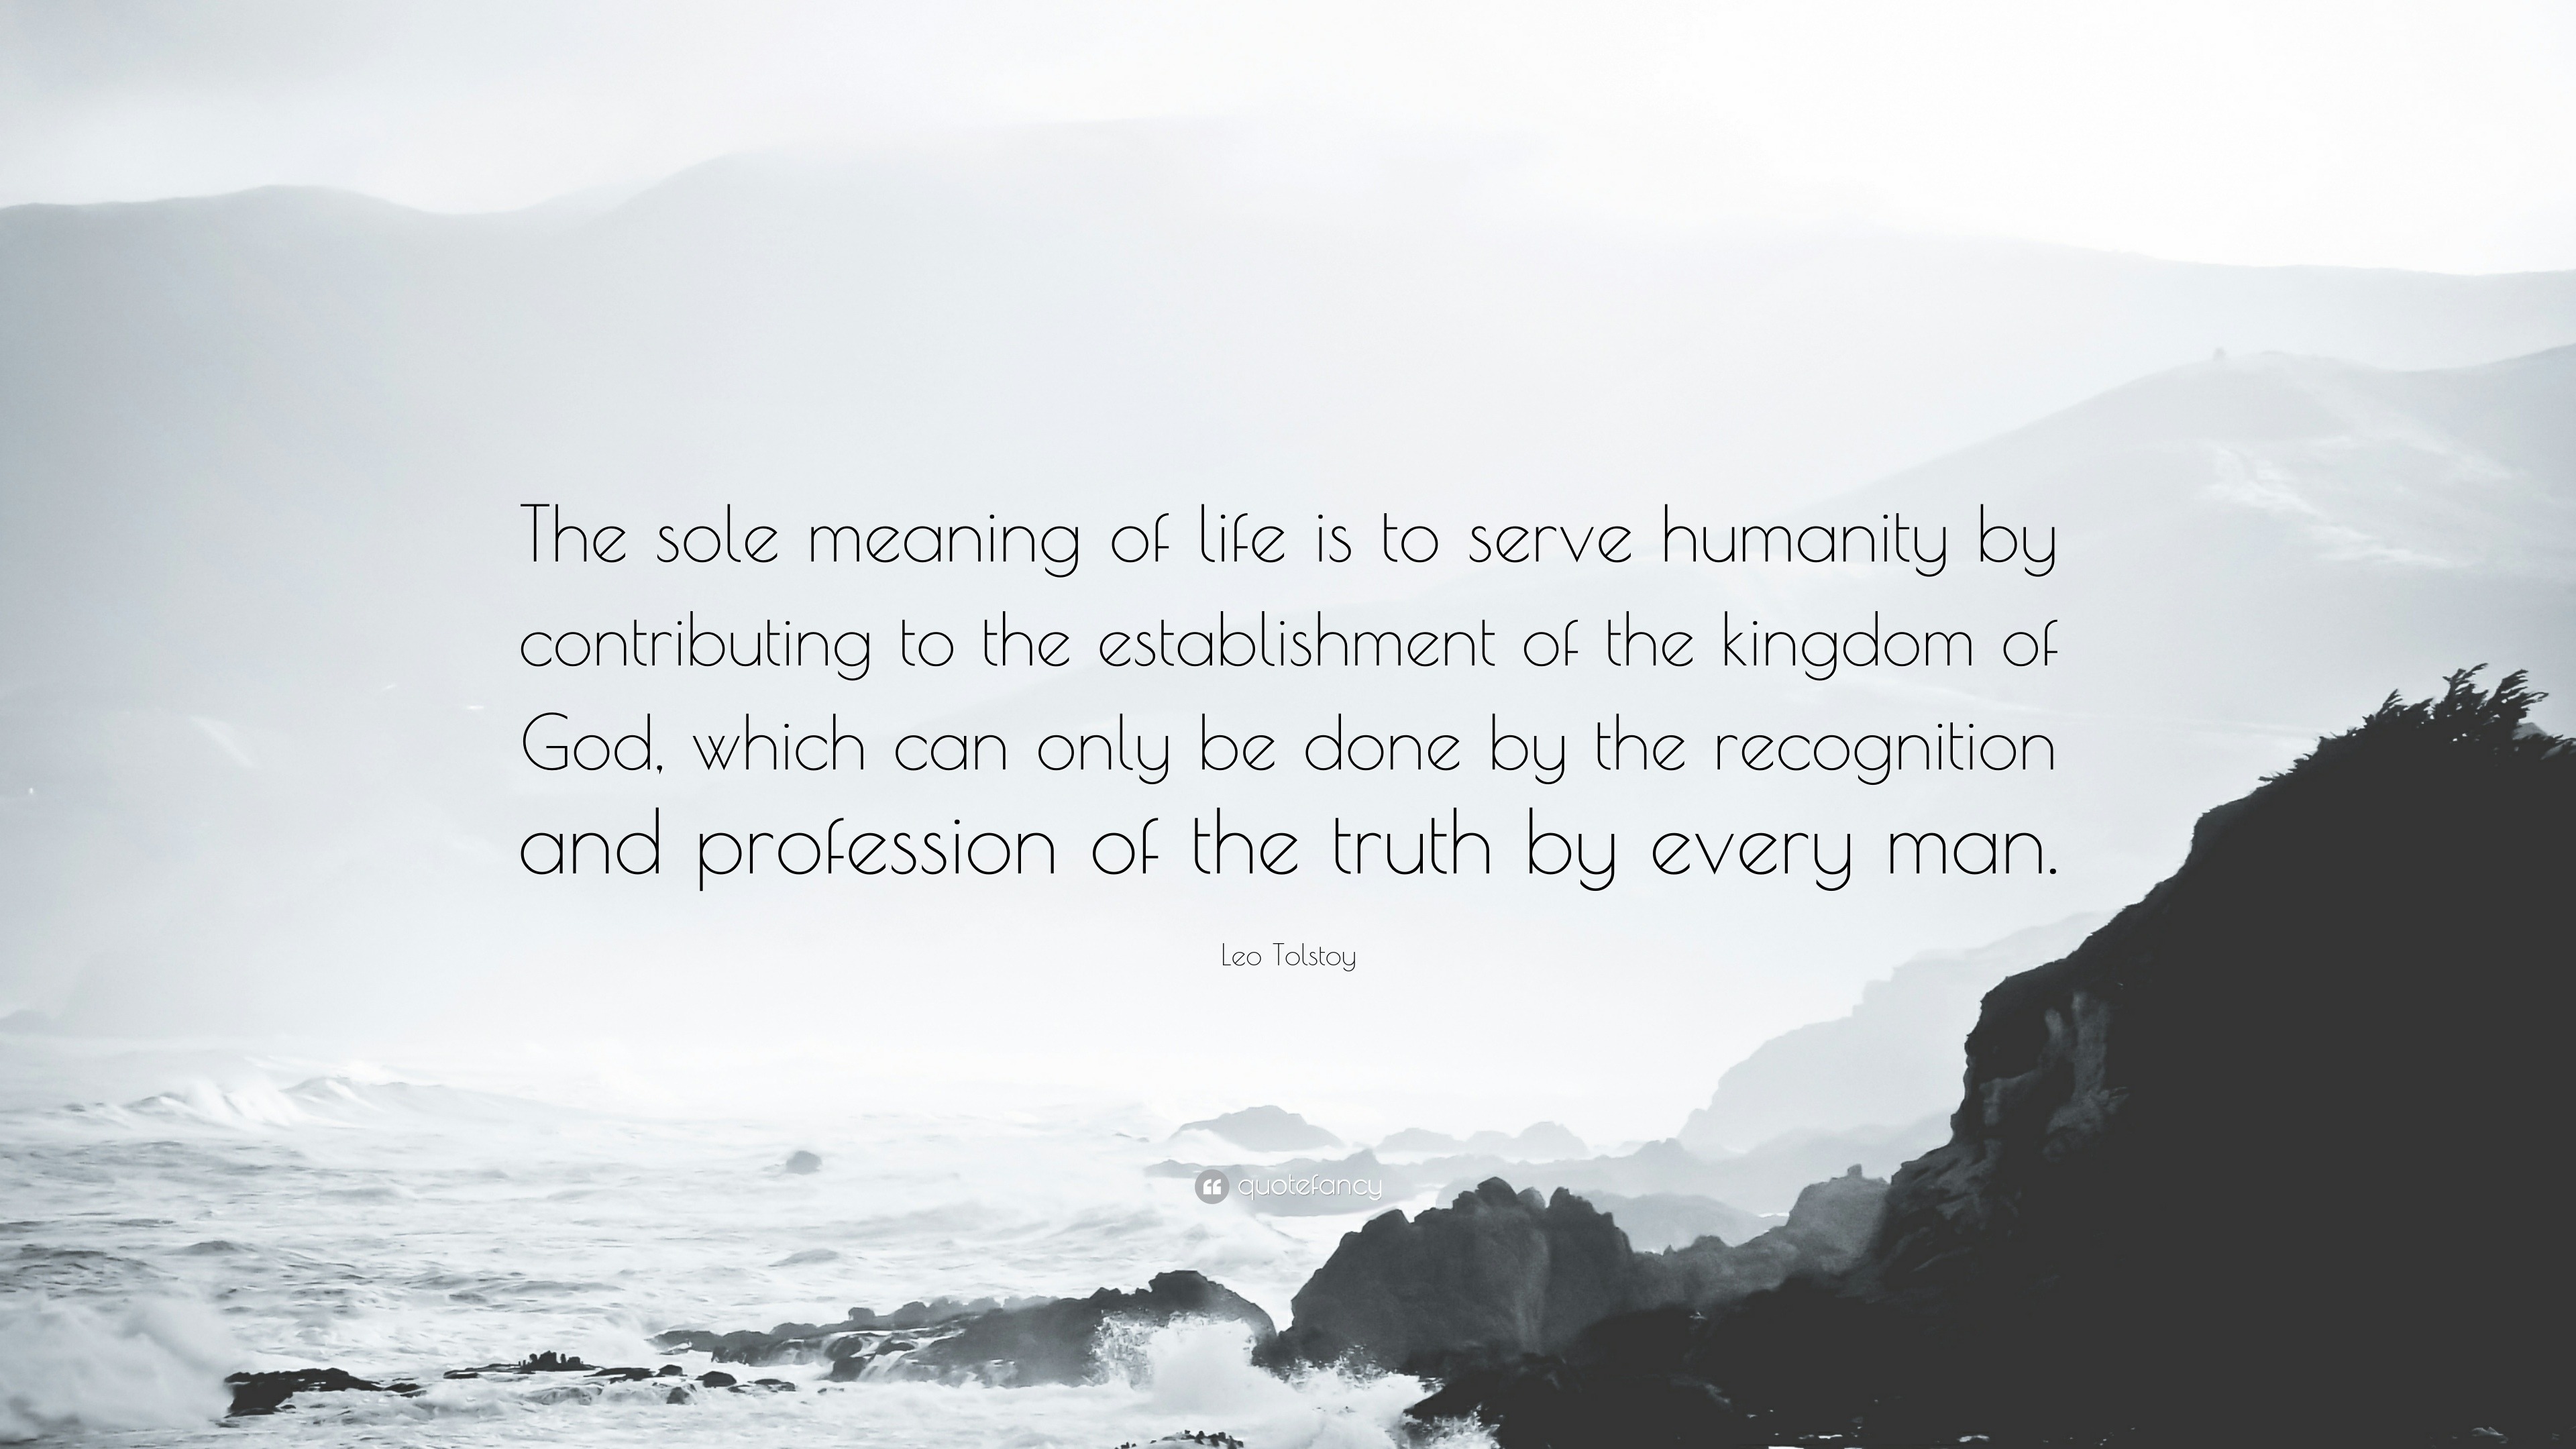 Leo Tolstoy Quote “The sole meaning of life is to serve humanity by contributing